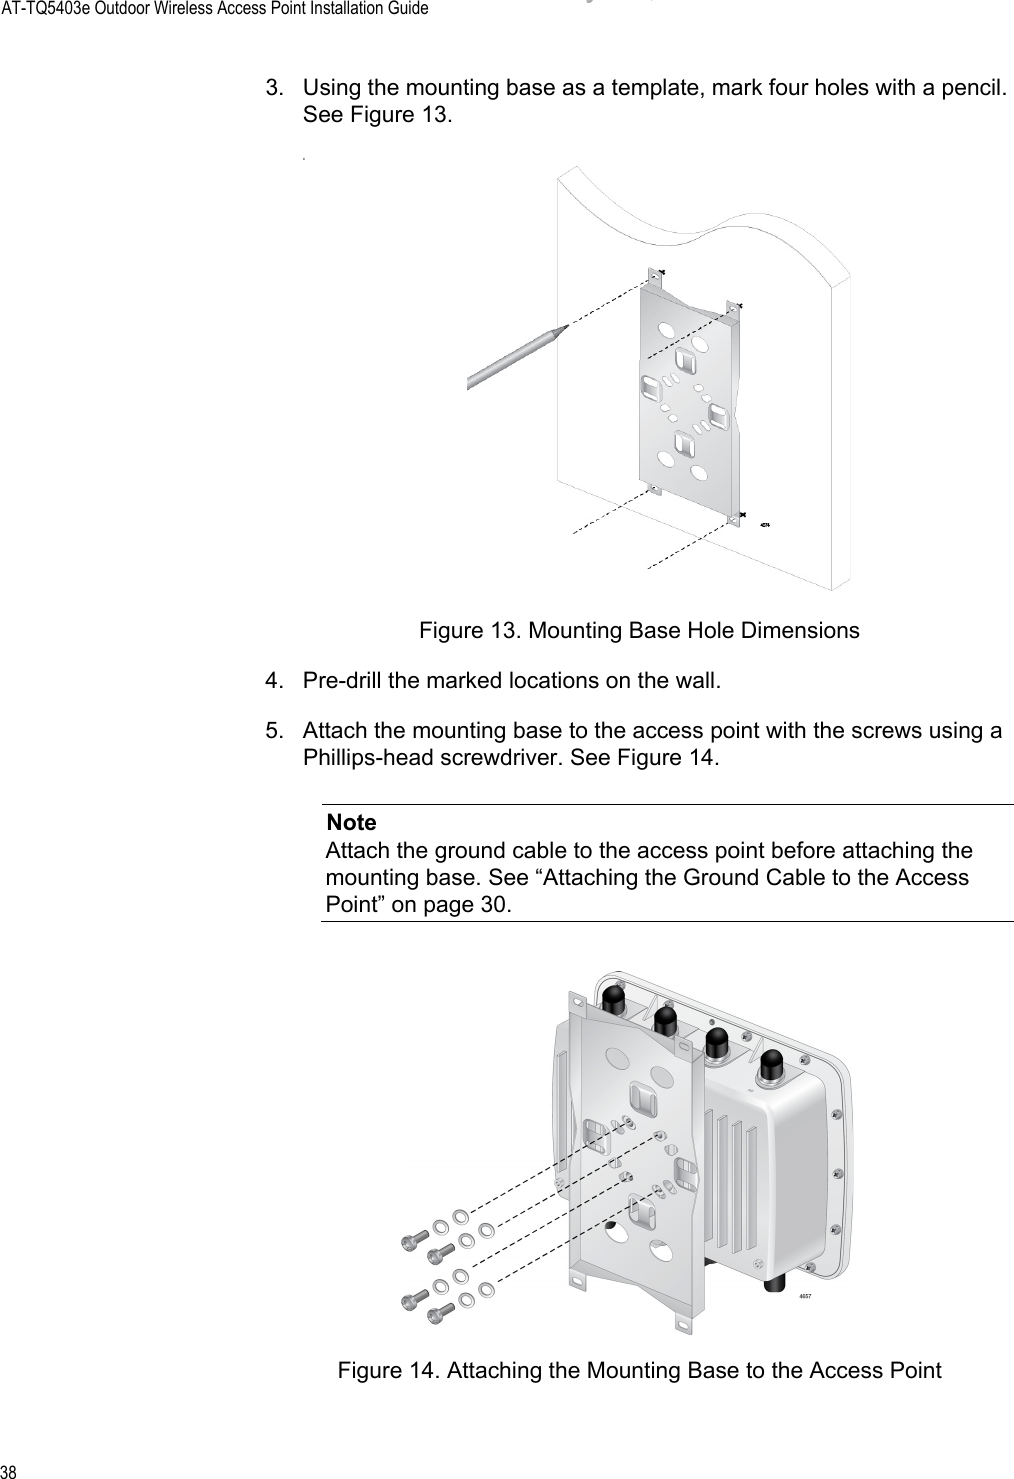 AT-TQ5403e Outdoor Wireless Access Point Installation Guide383. Using the mounting base as a template, mark four holes with a pencil. See Figure 13.cFigure 13. Mounting Base Hole Dimensions4. Pre-drill the marked locations on the wall.5. Attach the mounting base to the access point with the screws using a Phillips-head screwdriver. See Figure 14.NoteAttach the ground cable to the access point before attaching the mounting base. See “Attaching the Ground Cable to the Access Point” on page 30.Figure 14. Attaching the Mounting Base to the Access PointDraft 5 on February 14, 2019